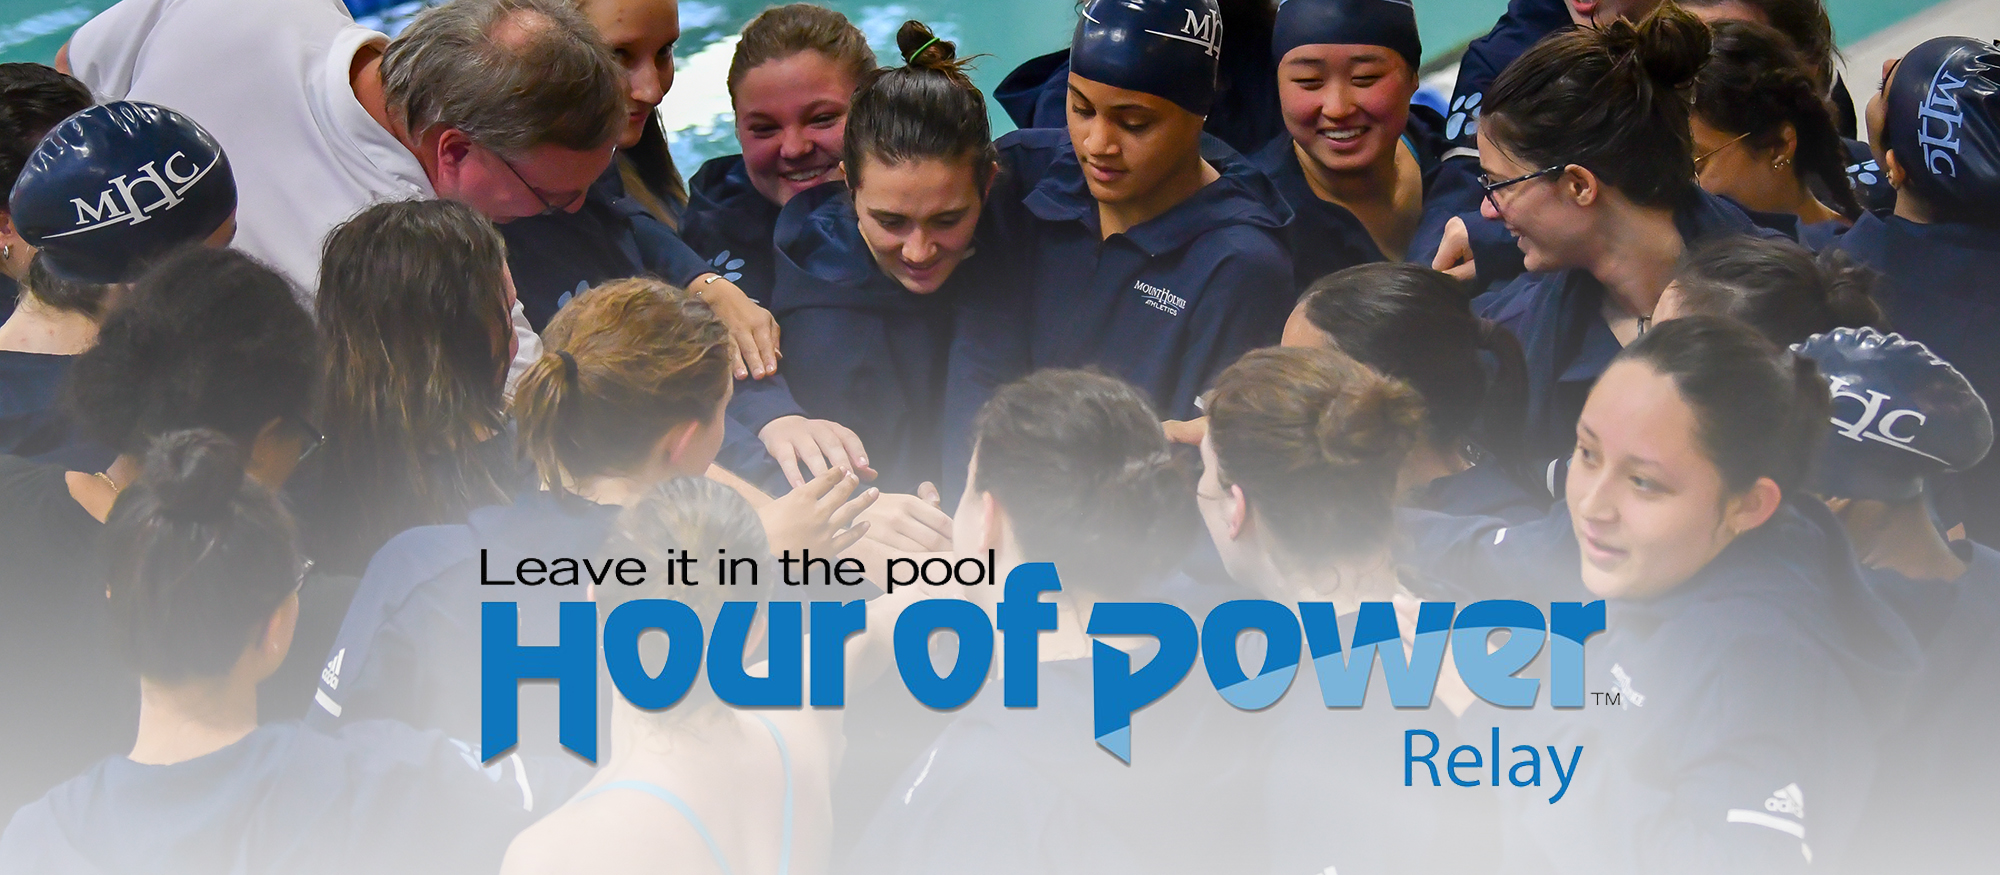 Swimming and Diving to Participate in "Hour of Power" Relay for Pediatric Sarcoma Research on Tuesday